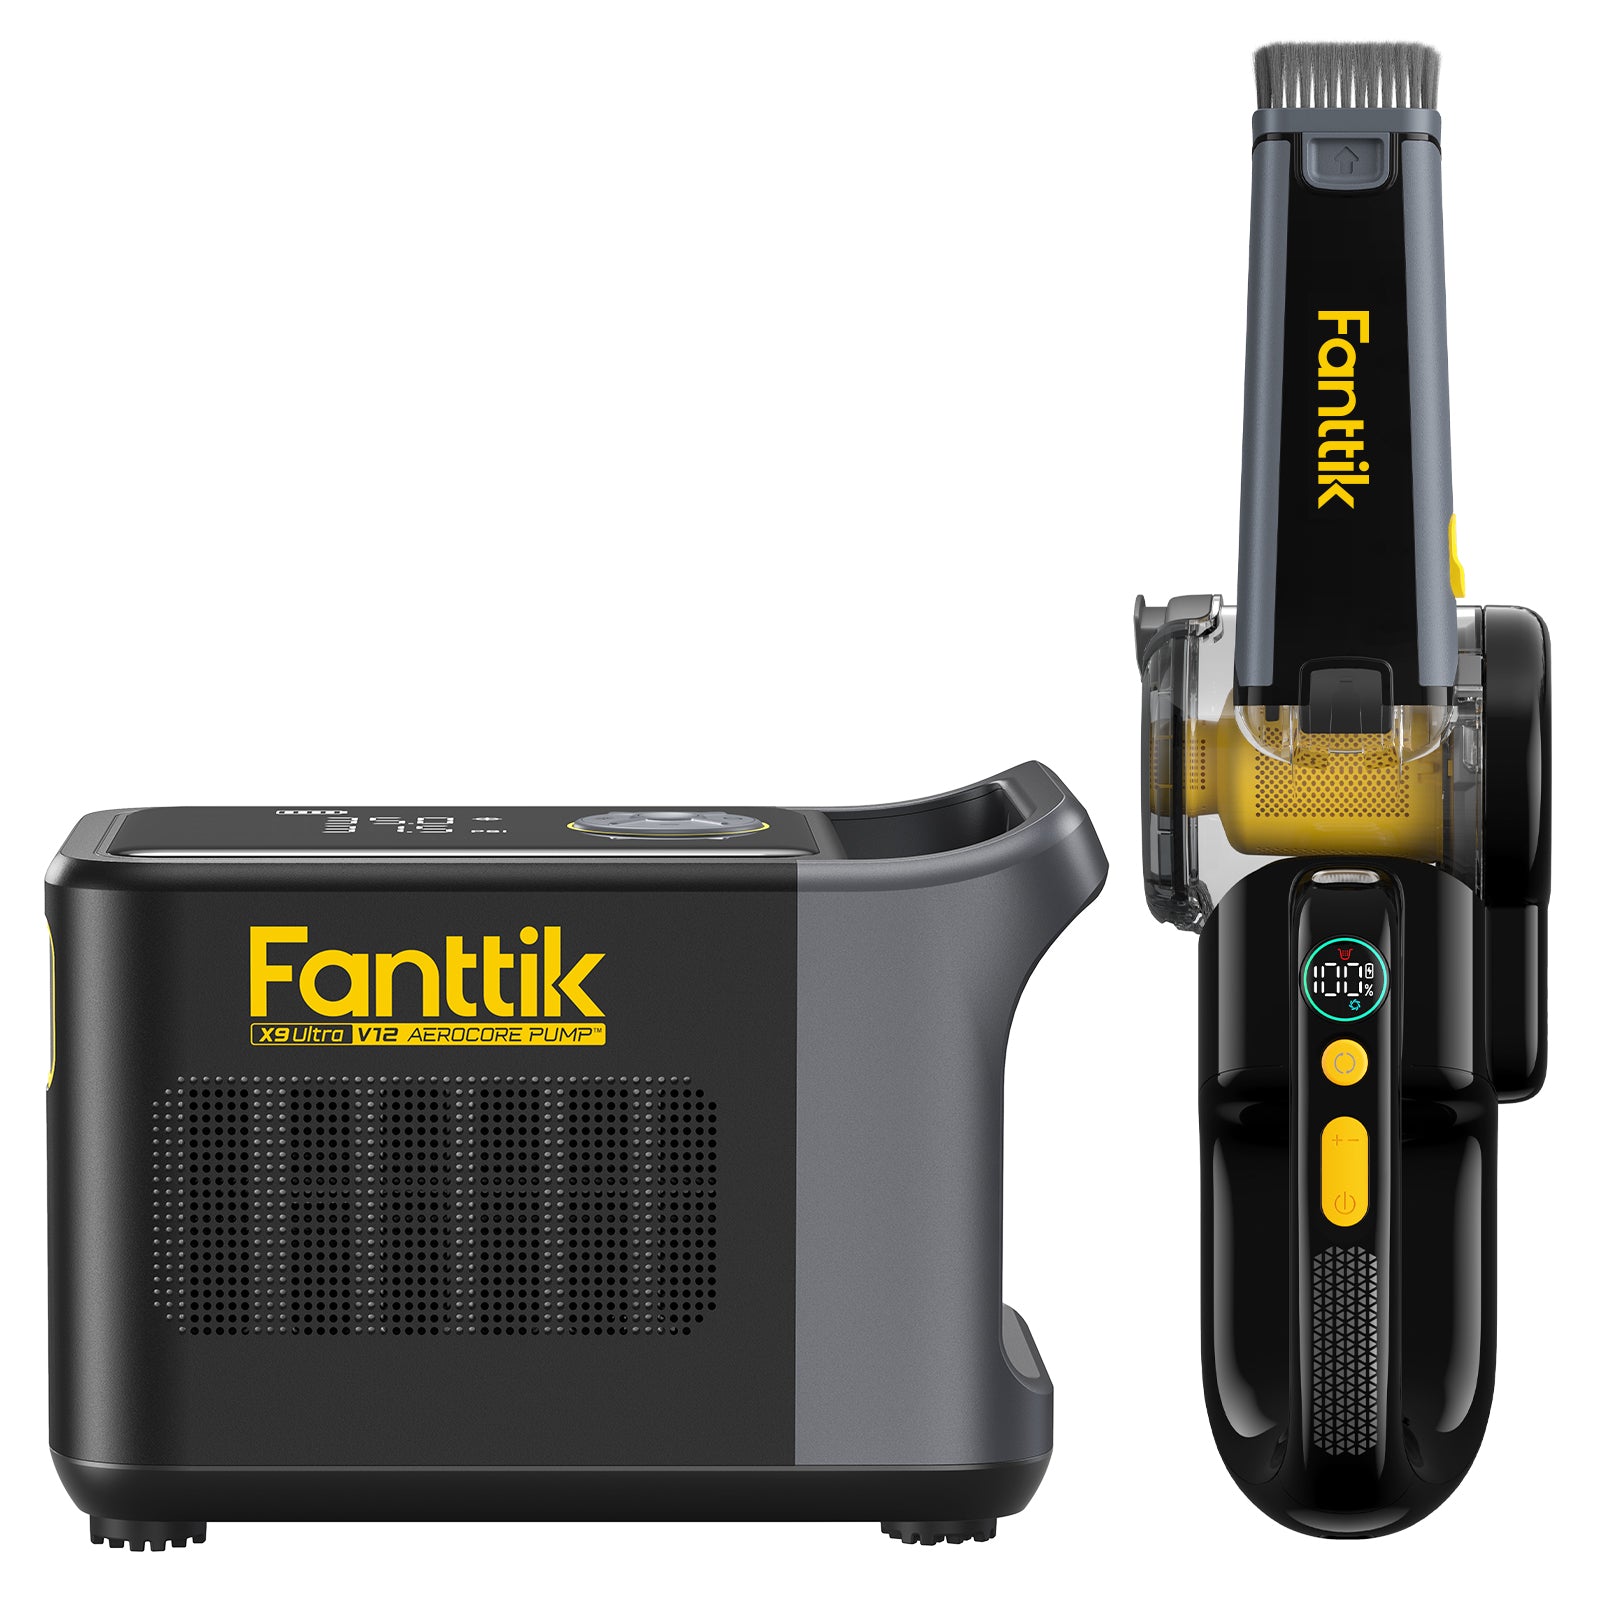 Fanttik X9 Ultra Tire Inflator and V10 Apex Foldable Car Vacuum displayed side by side, showcasing their compact and portable design, with digital display features and black and yellow color scheme.